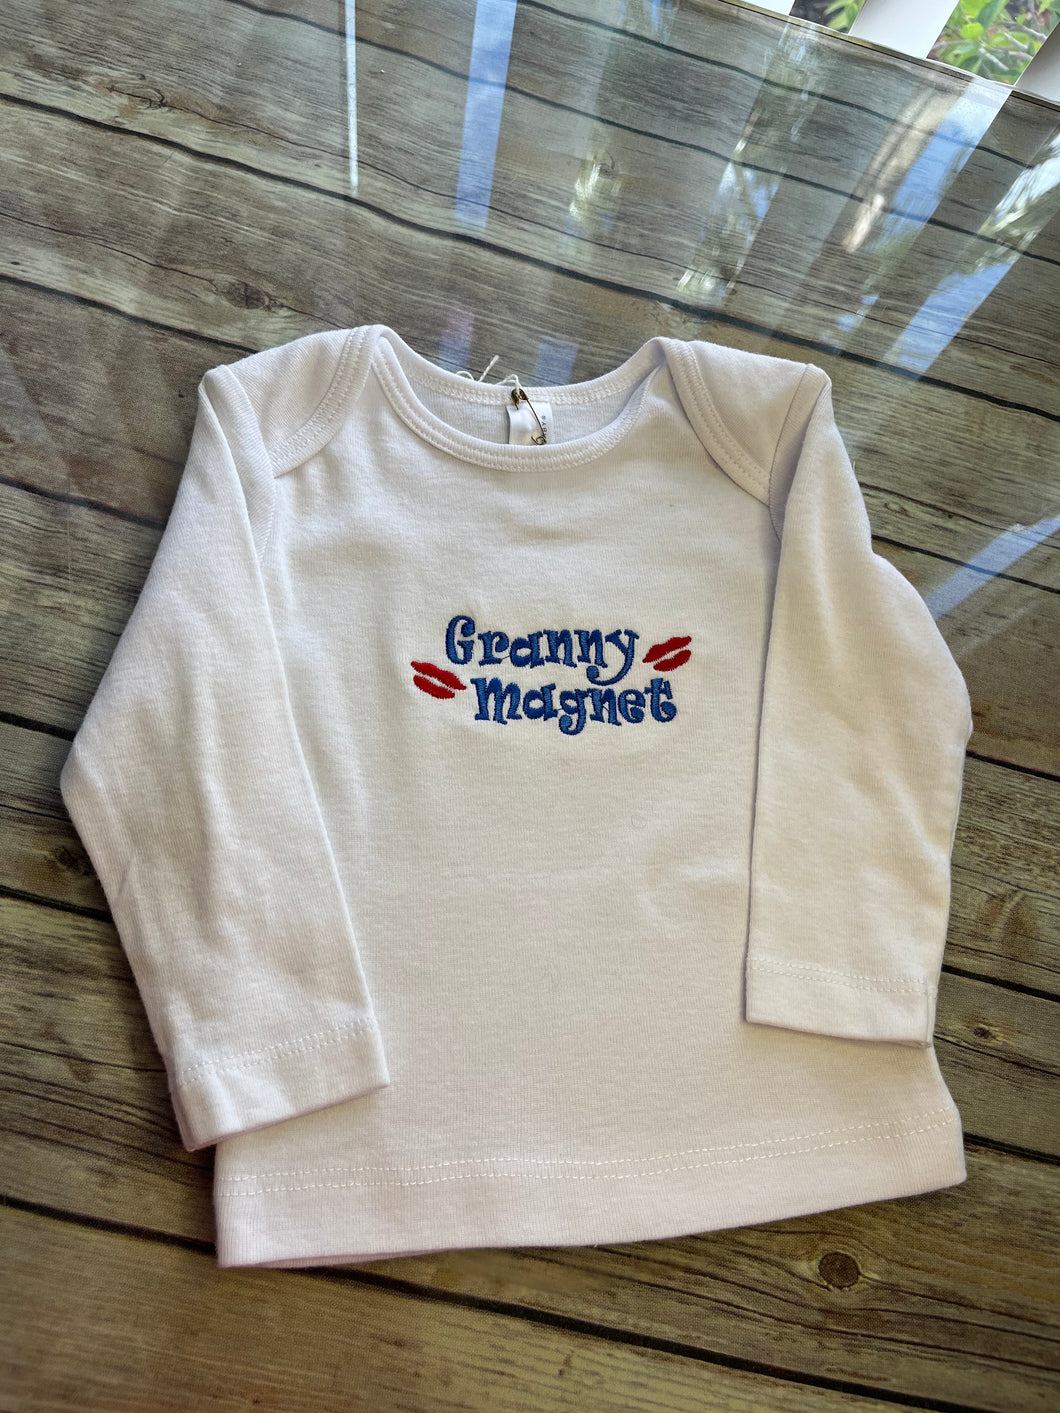 Granny Magnet long sleeved T shirt size 3-6 months